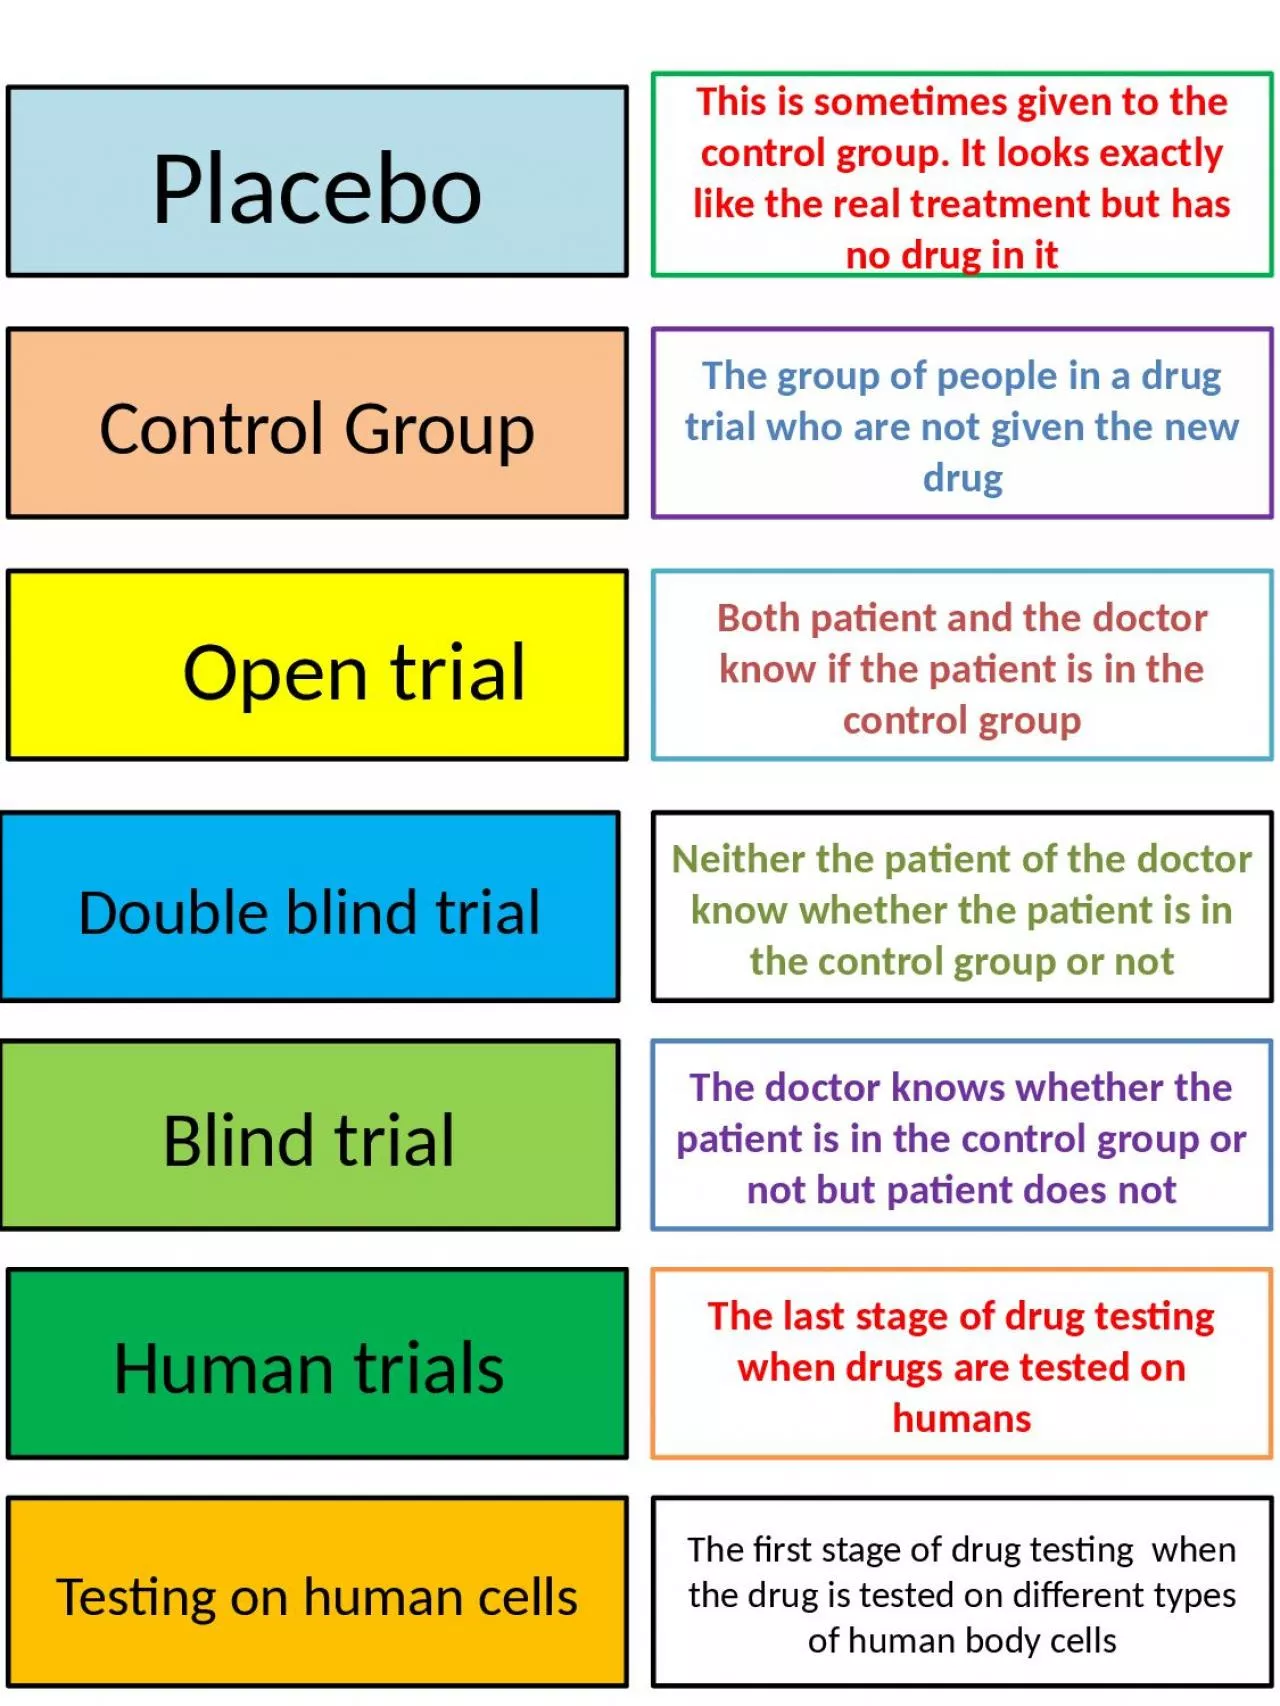 Placebo Control Group The group of people in a drug trial who are not given the new